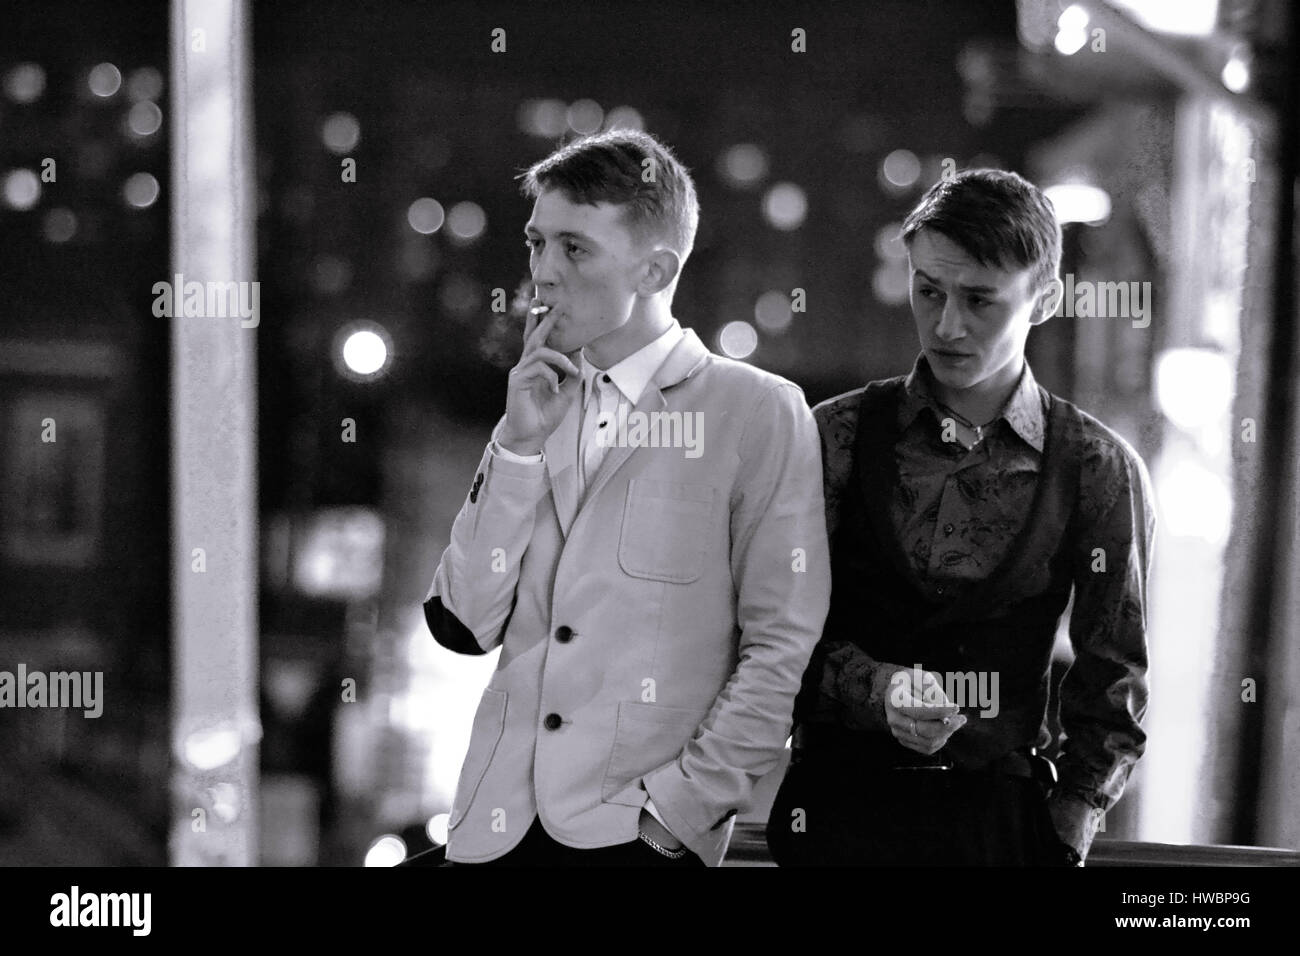 Detectives on the night city streets. Local strong serious mafia, mafia group. Young men in expensive luxuty suits, hat open, begin new business. Two  Stock Photo